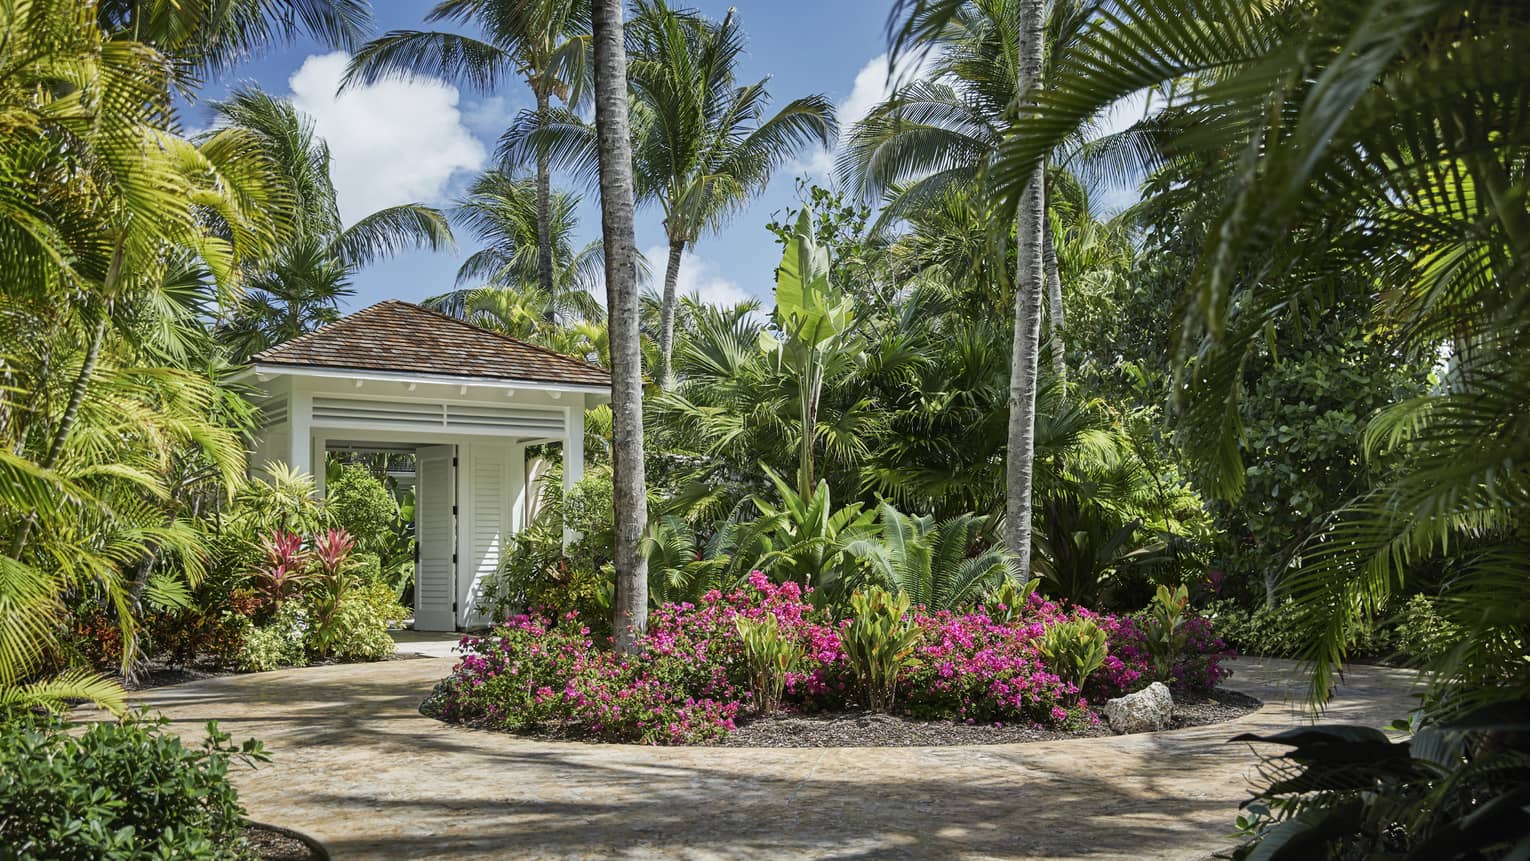 Ocean Club private villa exterior with palm trees, tropical gardens in courtyard